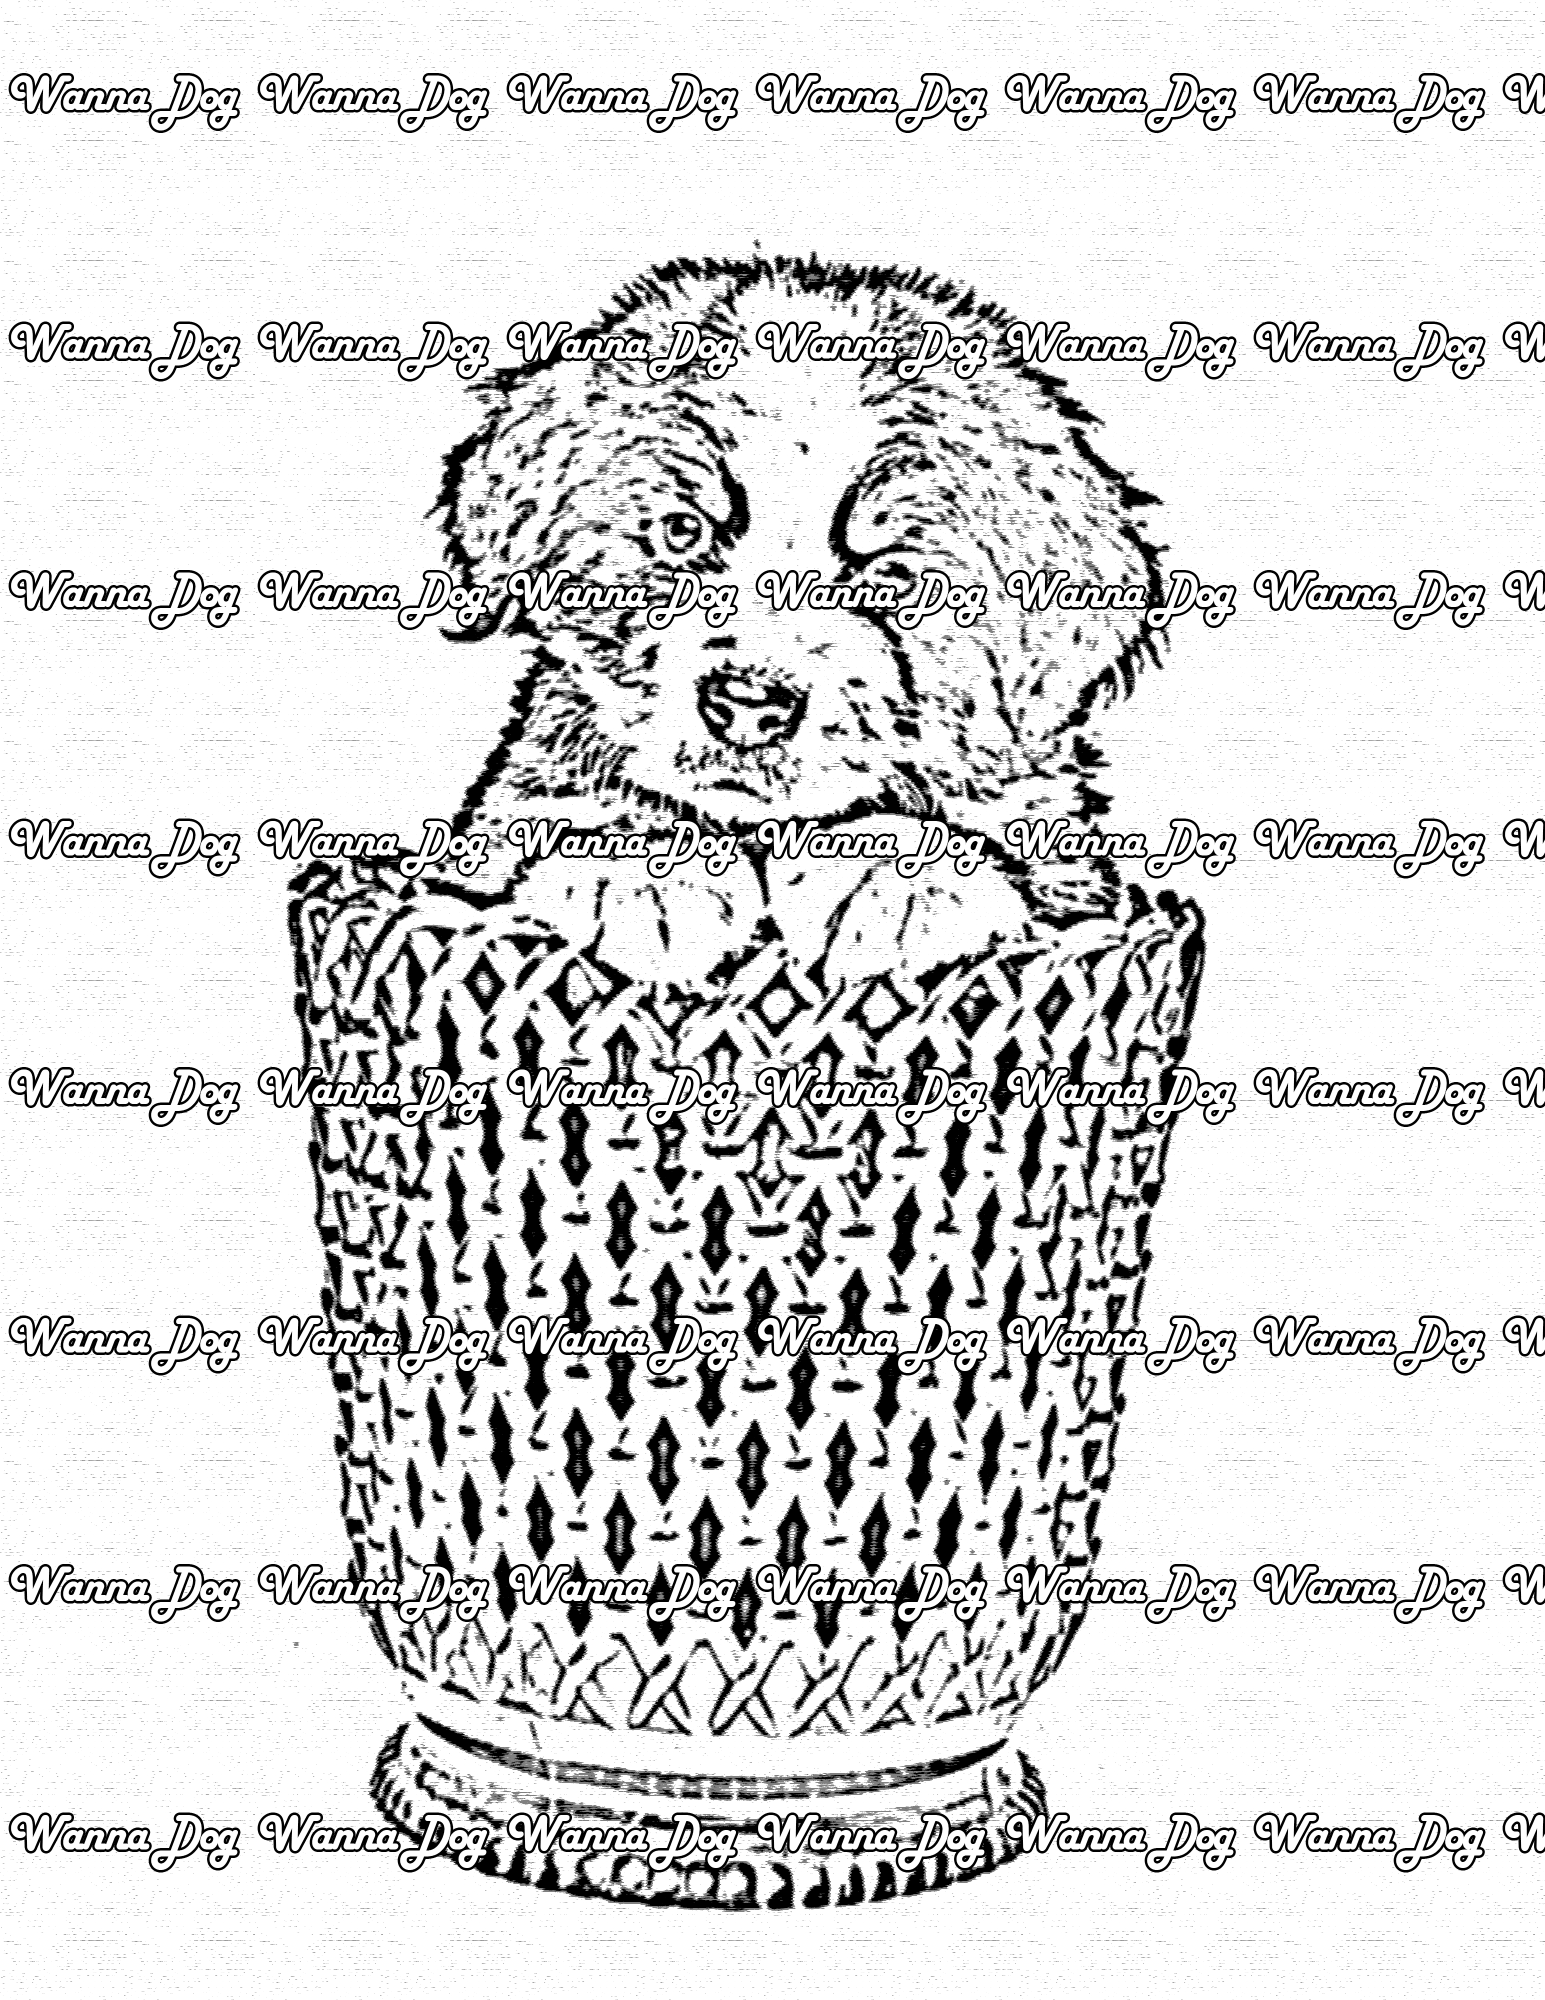 Bernese Mountain Dog Coloring Page of a Bernese Mountain Dog puppy in a vase